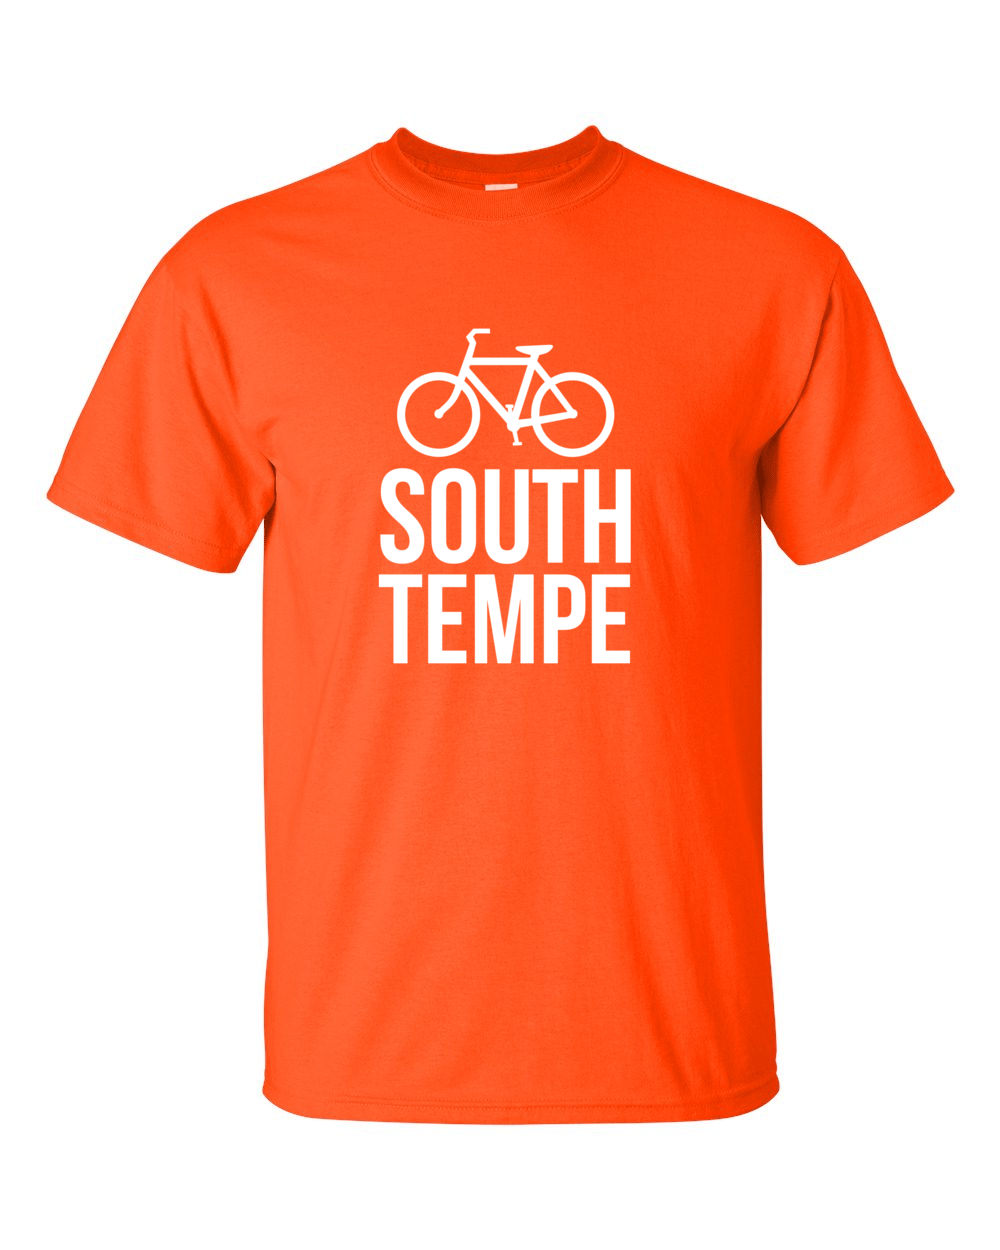 Image of South Tempe - Citrus Orange Shirt with White Letters